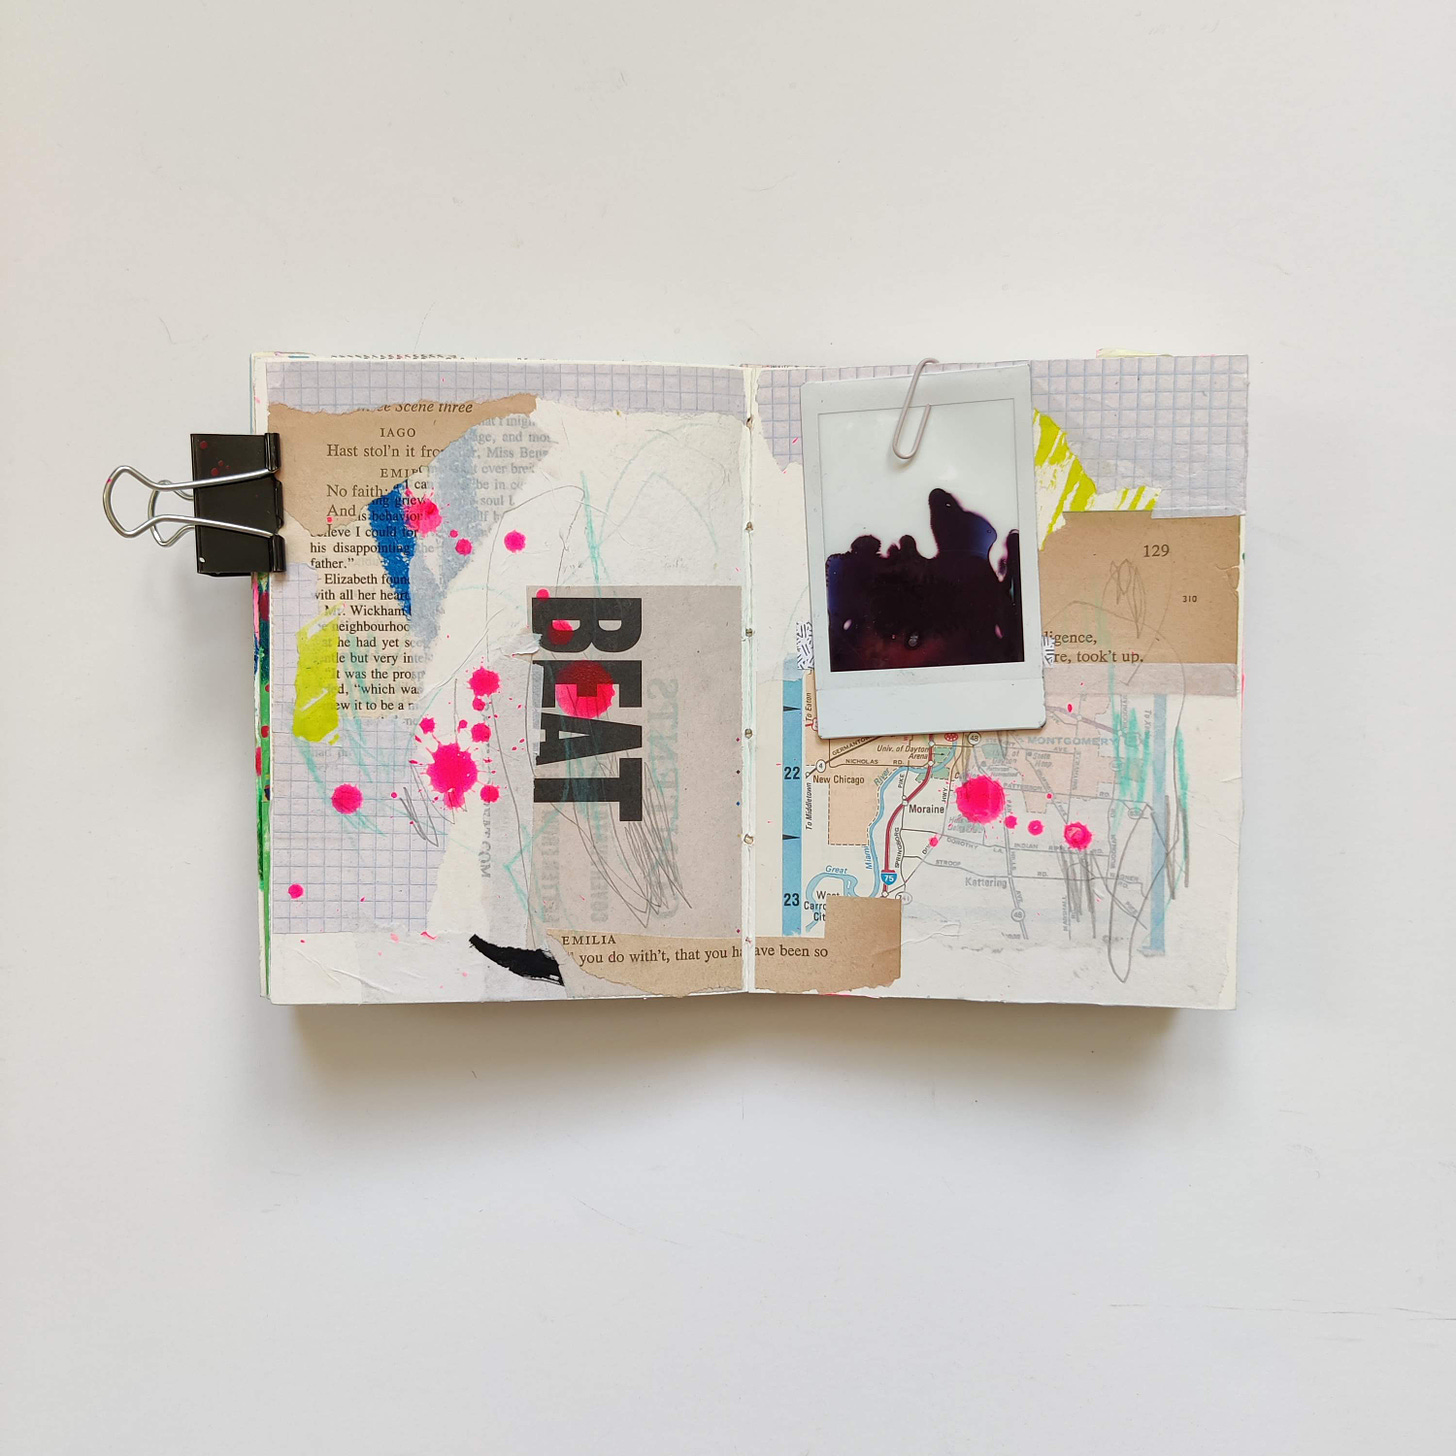 An open mixed media art journal with a layer of geometric and text-based collage, splatters of neon pink and a found mis-developed Instax photo.